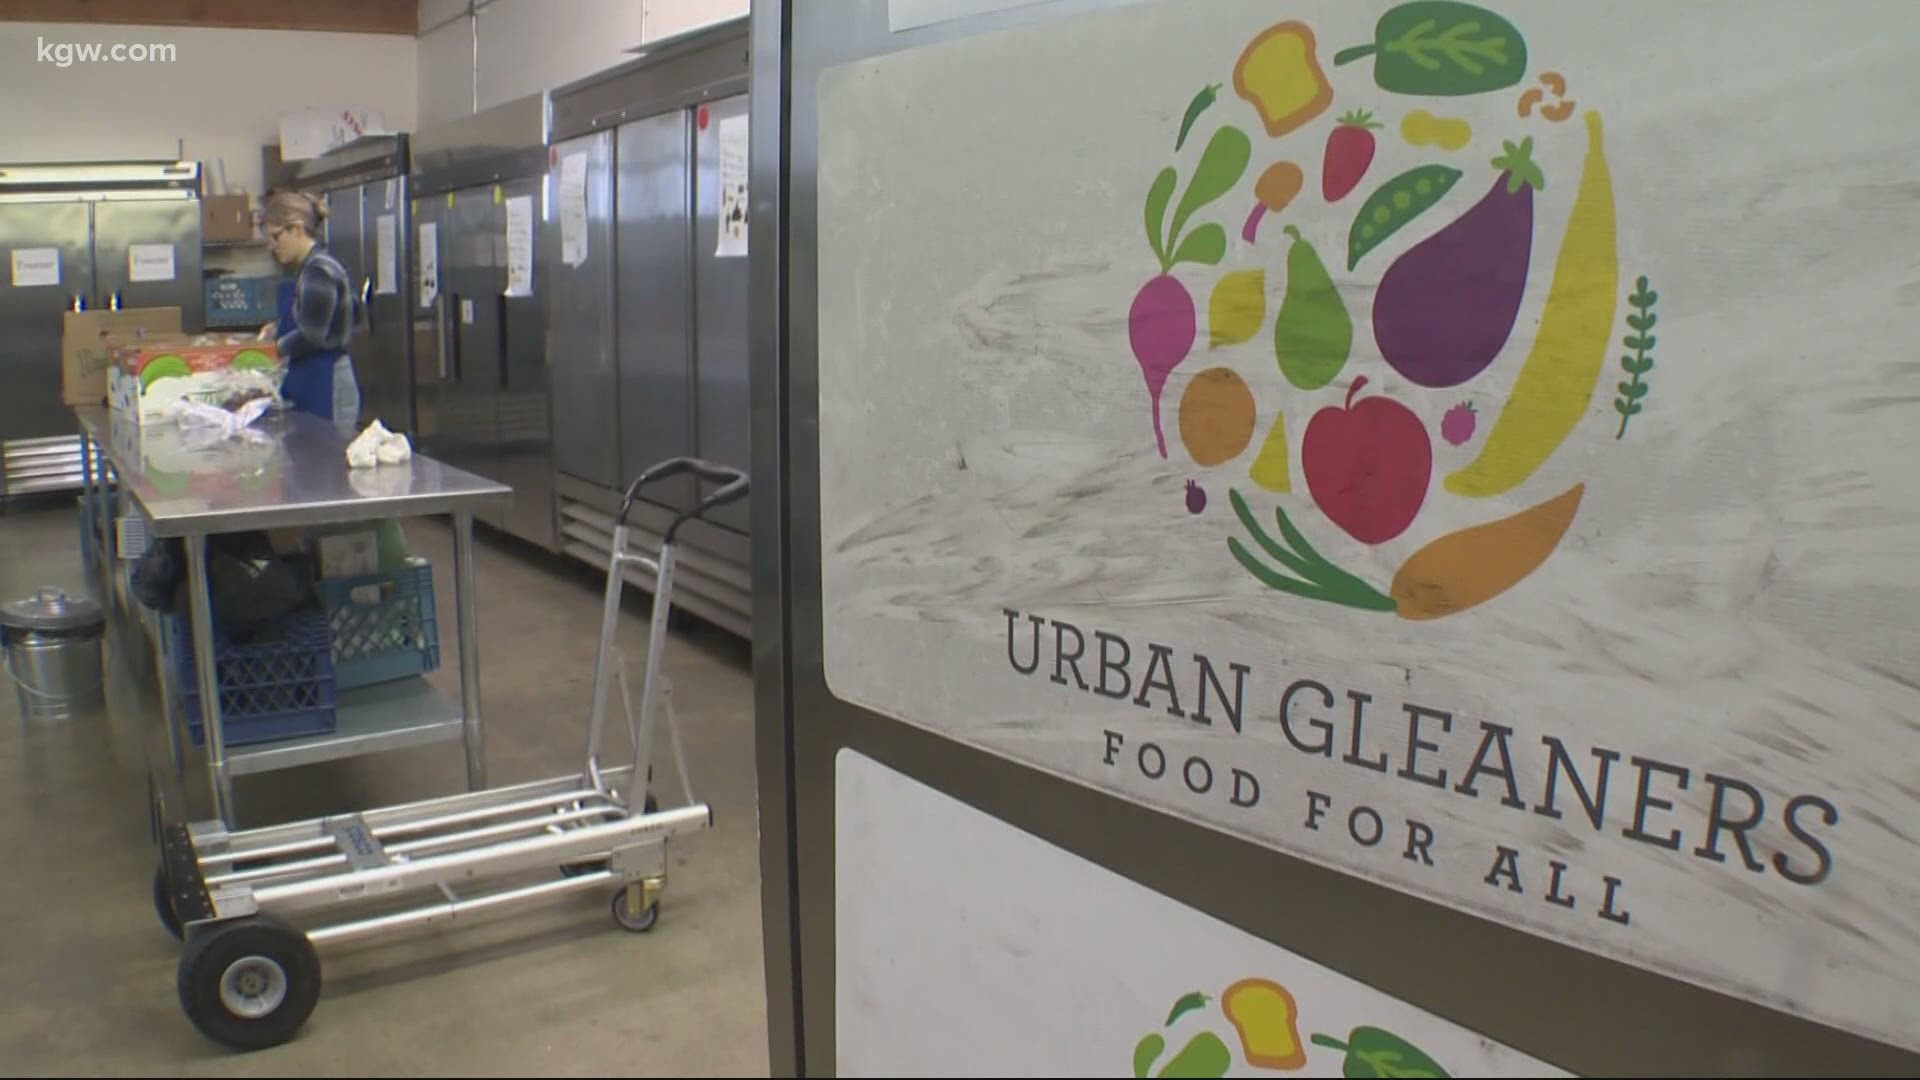 Rather than discard hundreds of sandwiches and salads, the Moda Center donated them to Urban Gleaners, which will get them to families in need.